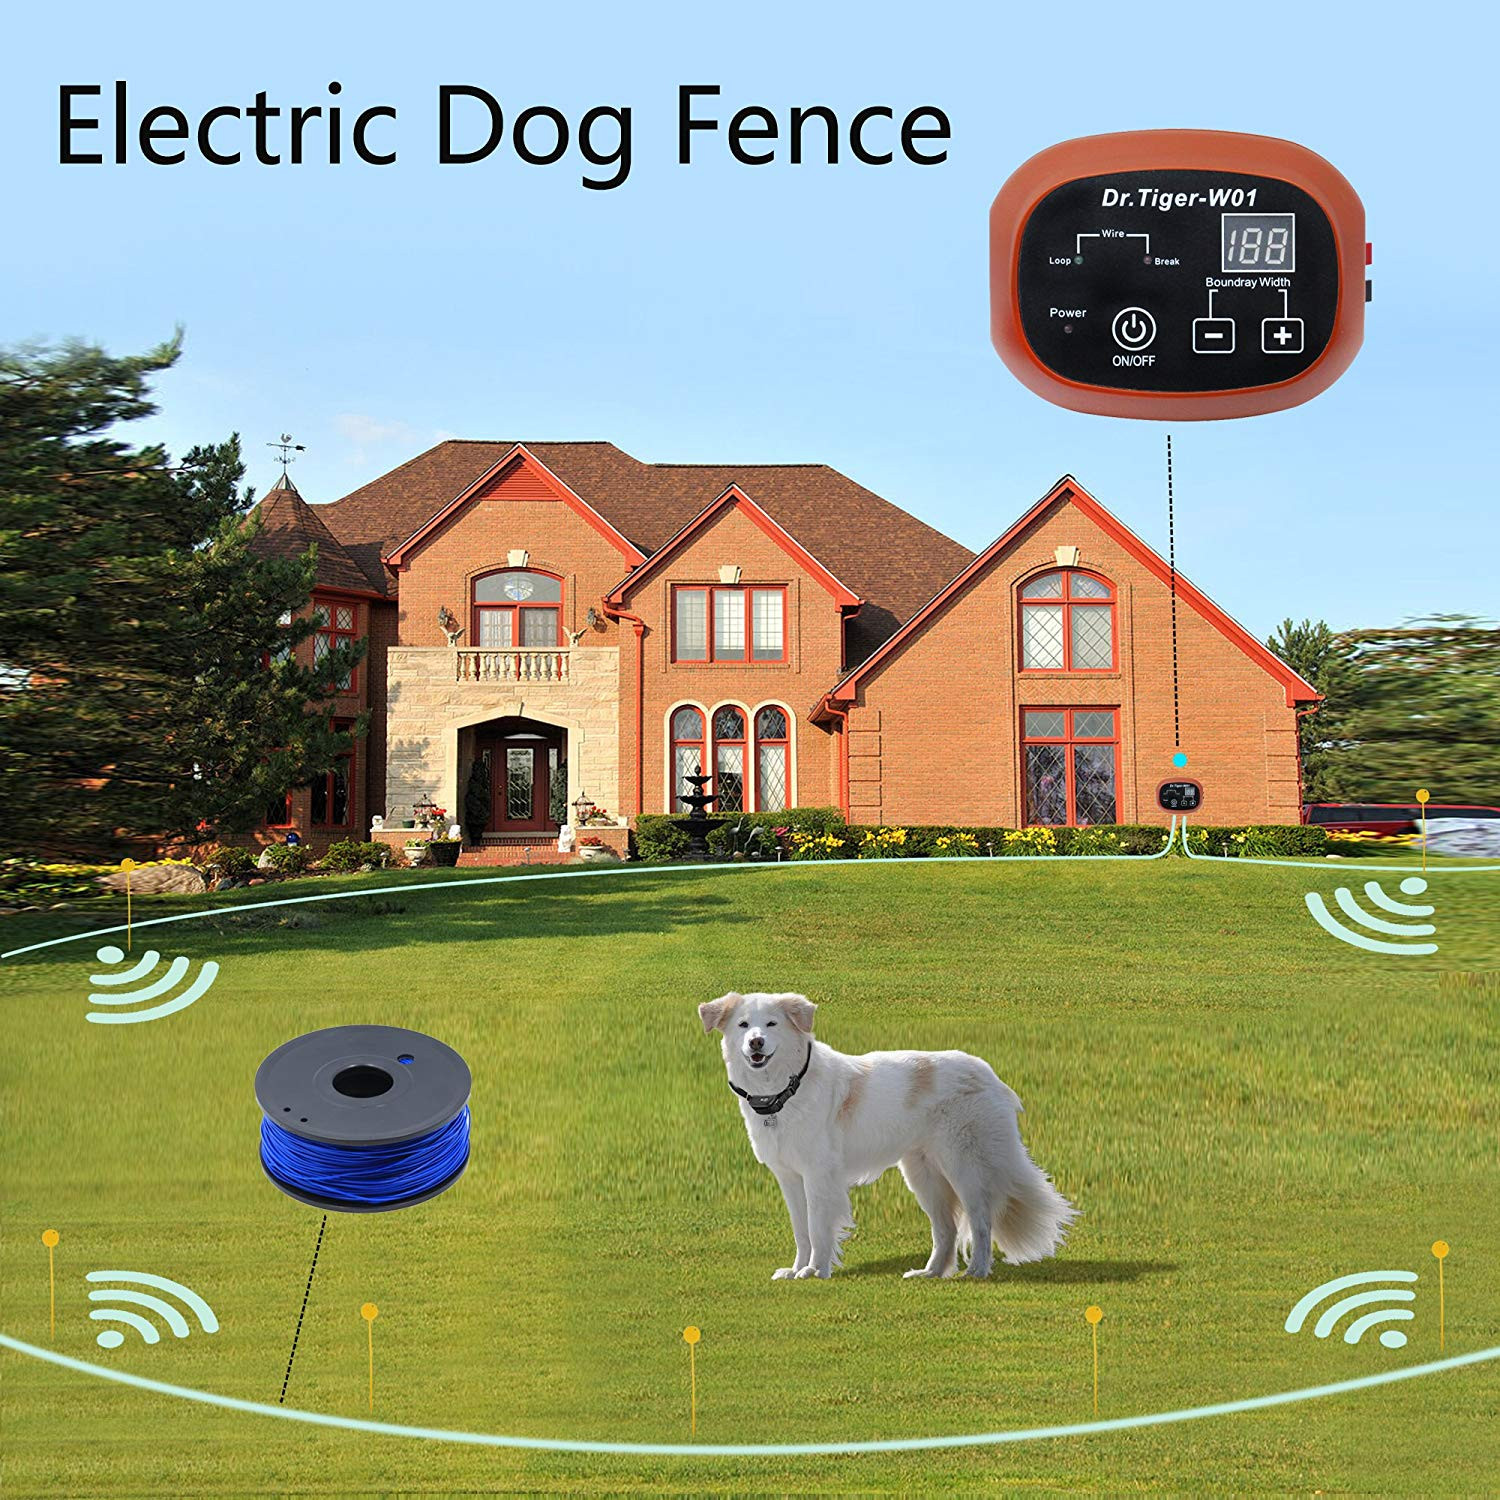 Electric Dog Fence Above Ground
 2 Dog Electric Fence In Ground Invisible Dog Containment